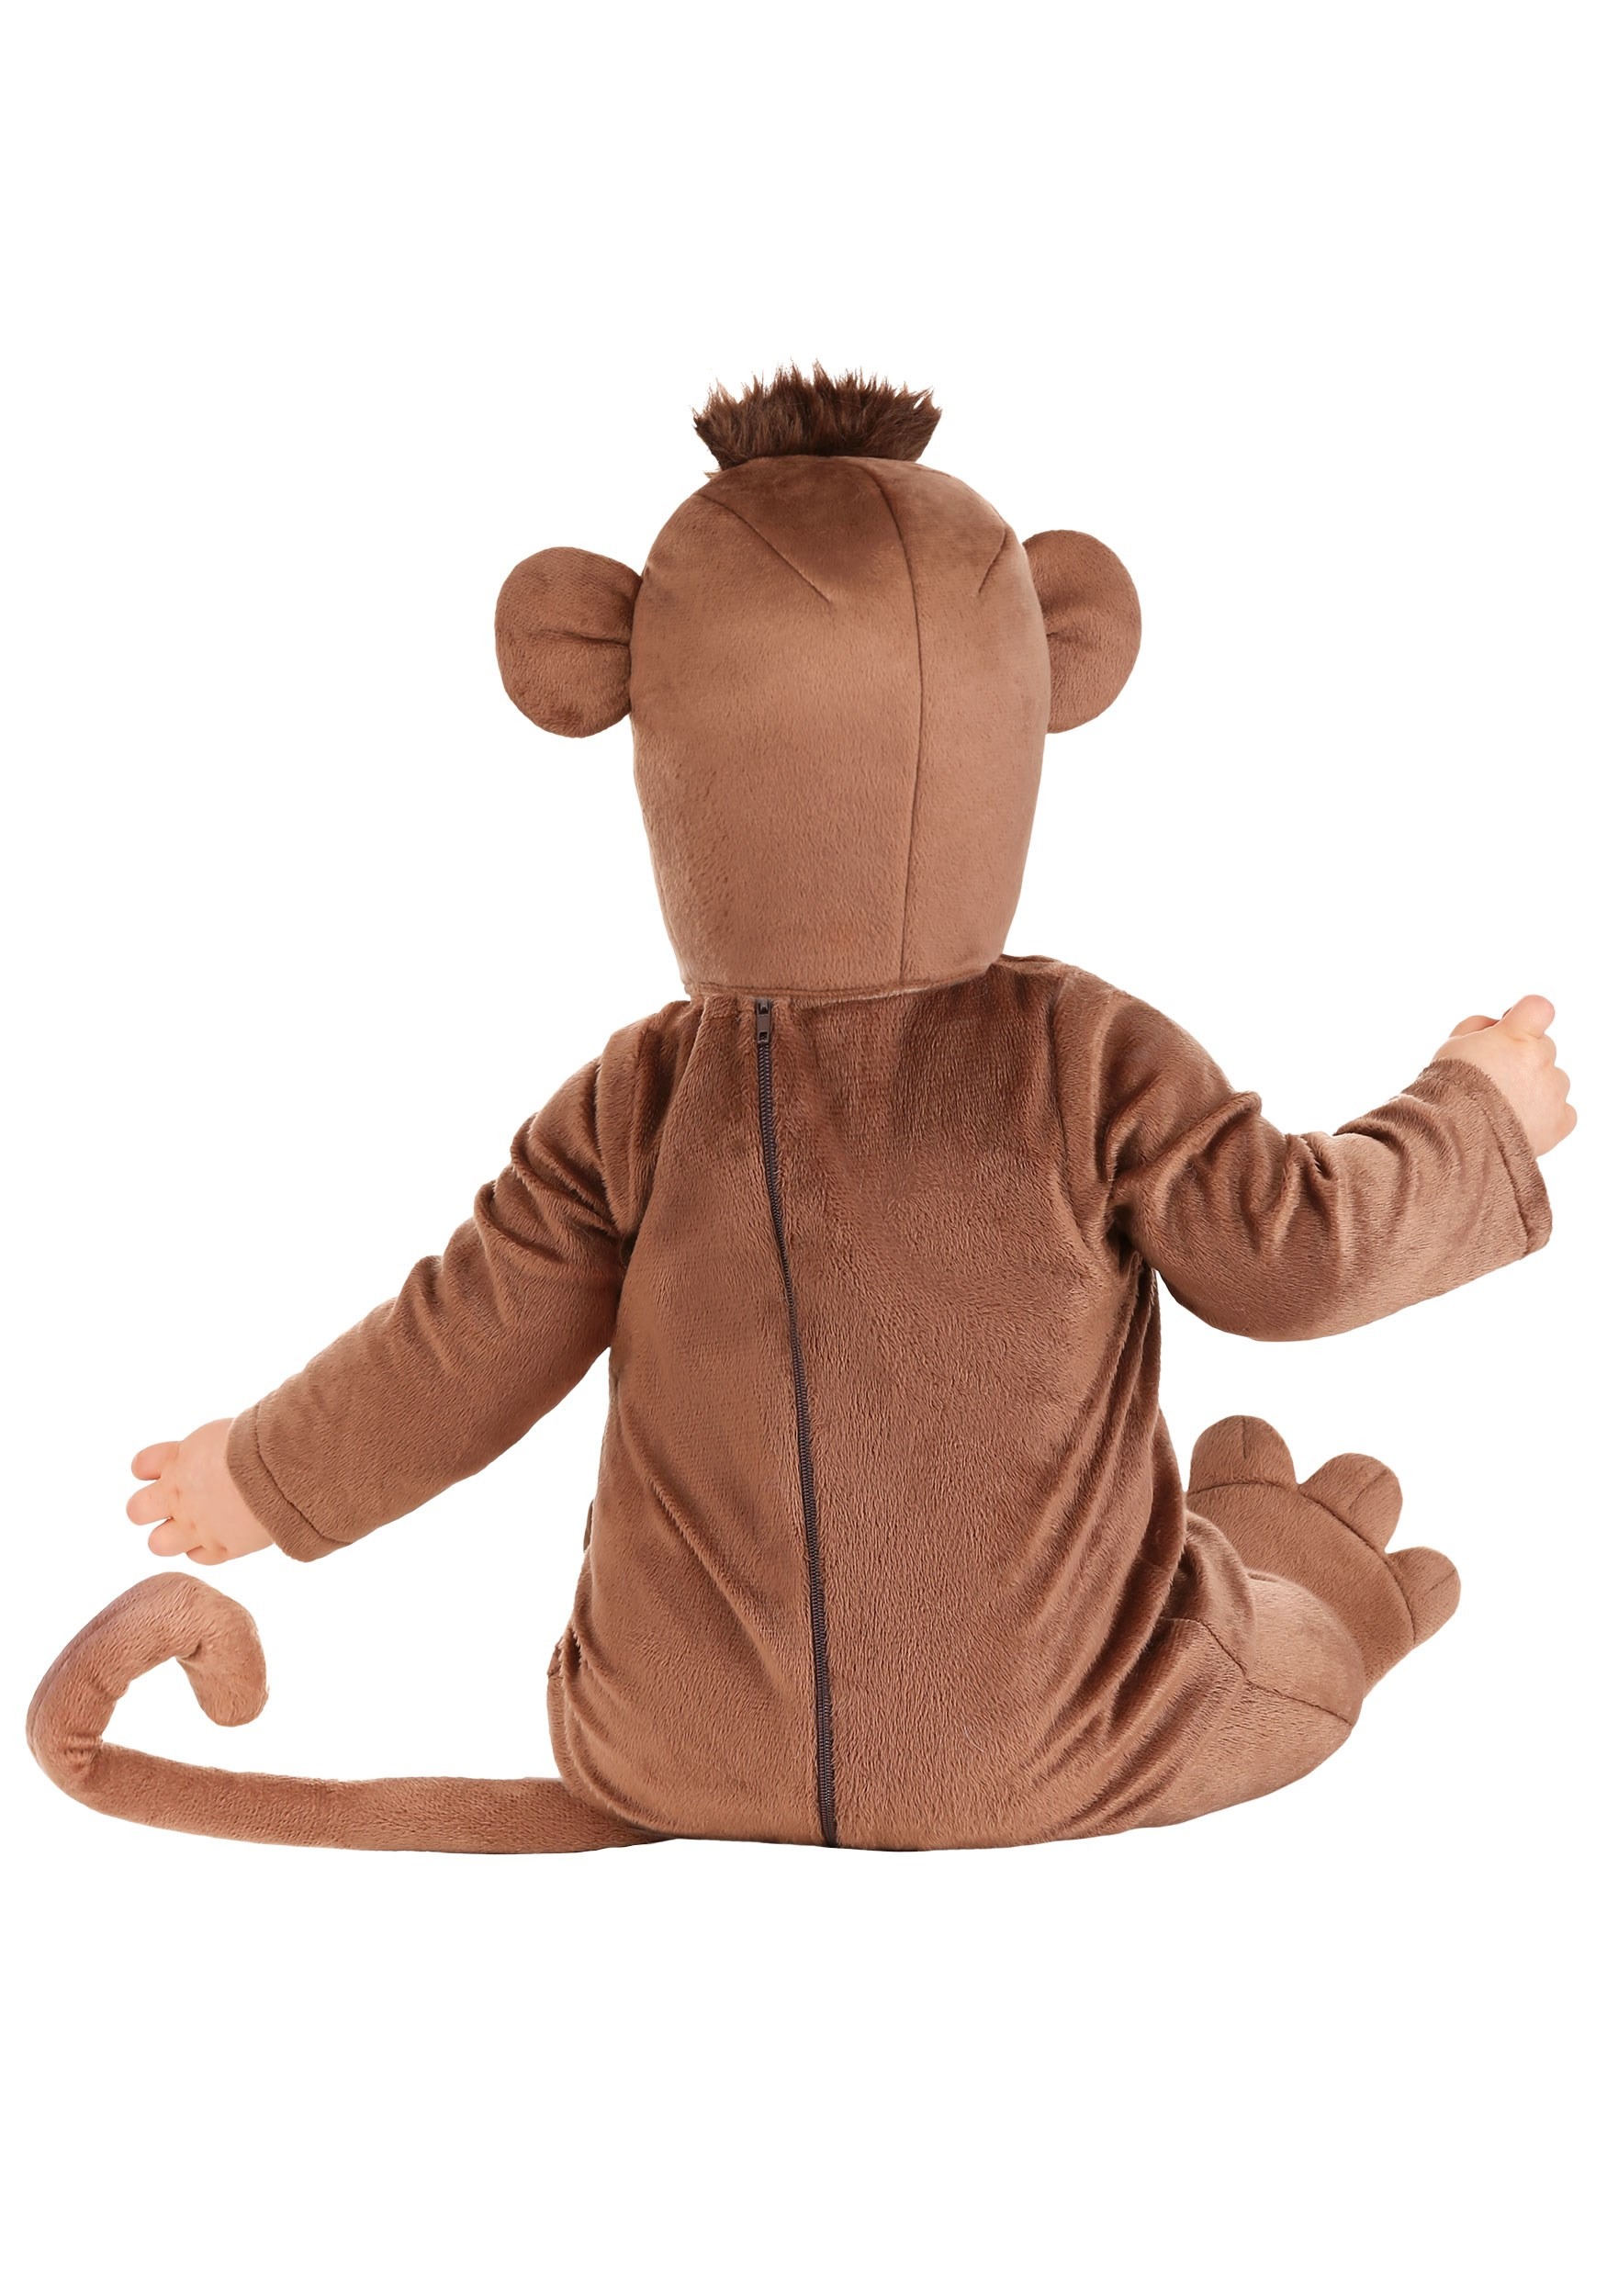 Monkey Costume For Baby